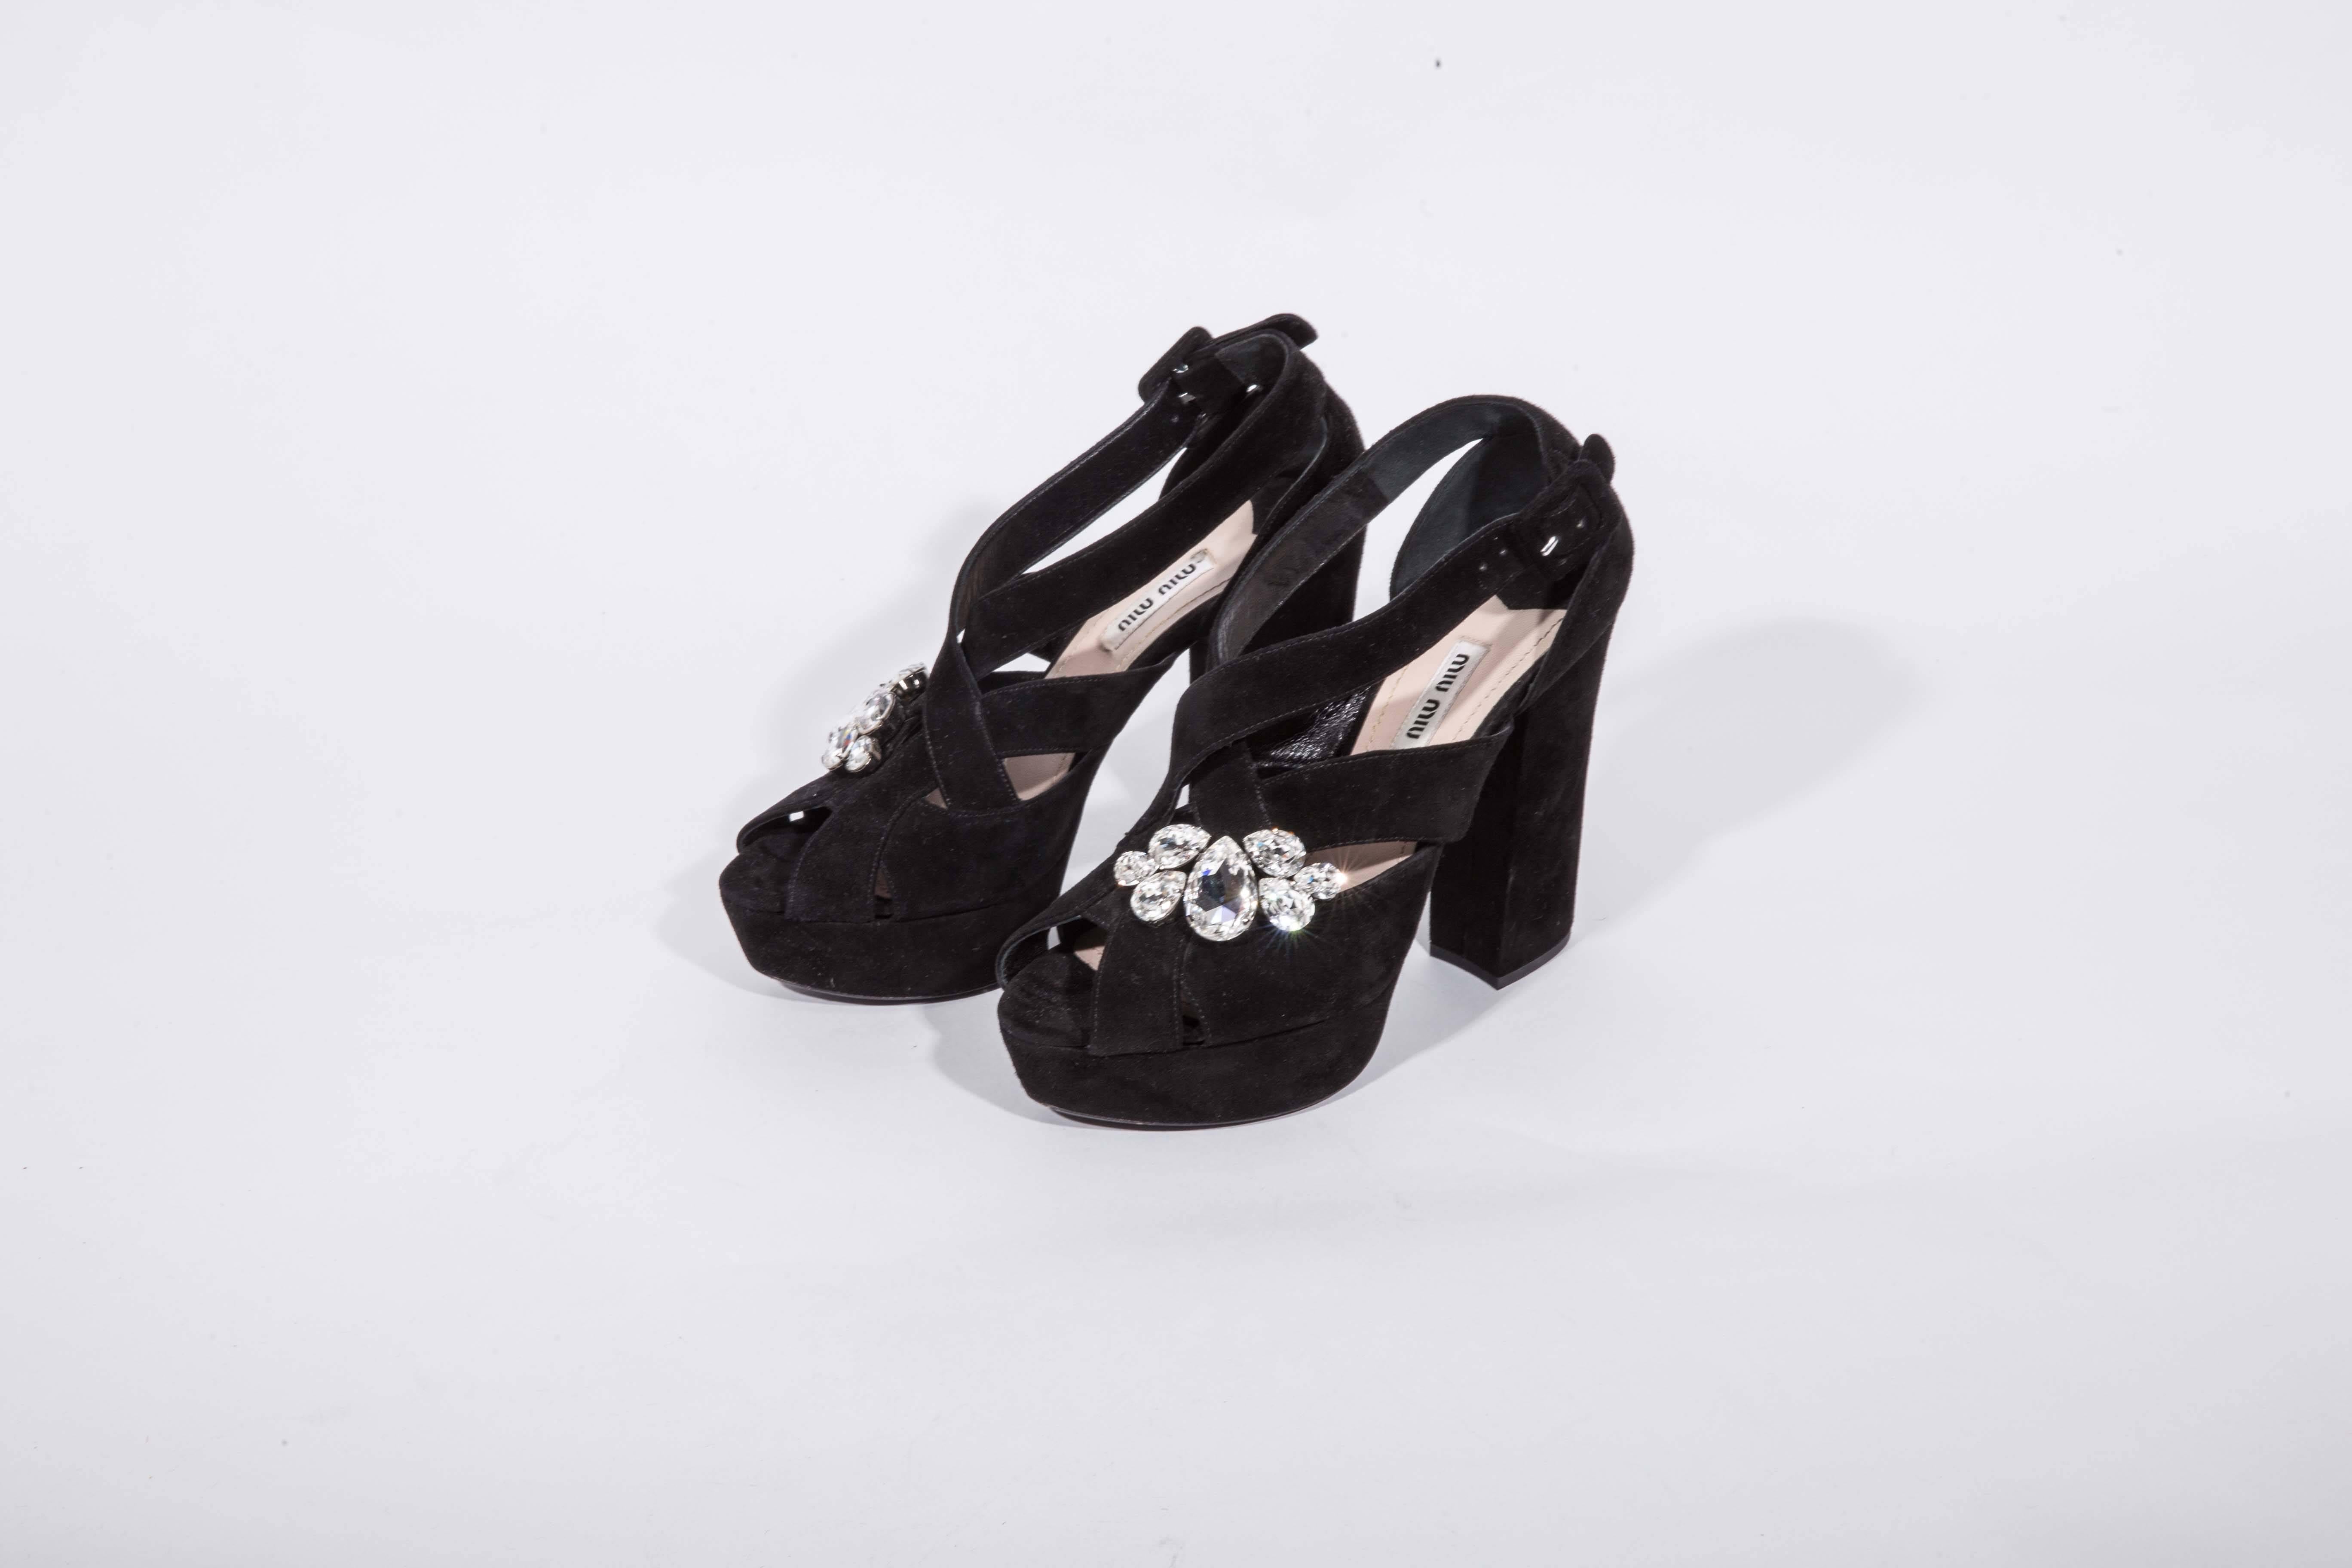 Black Suede Miu Miu Platforms with Crystal Embellishment. These shoes are a size 38 / 8 and have never been worn. AMAZING !!!